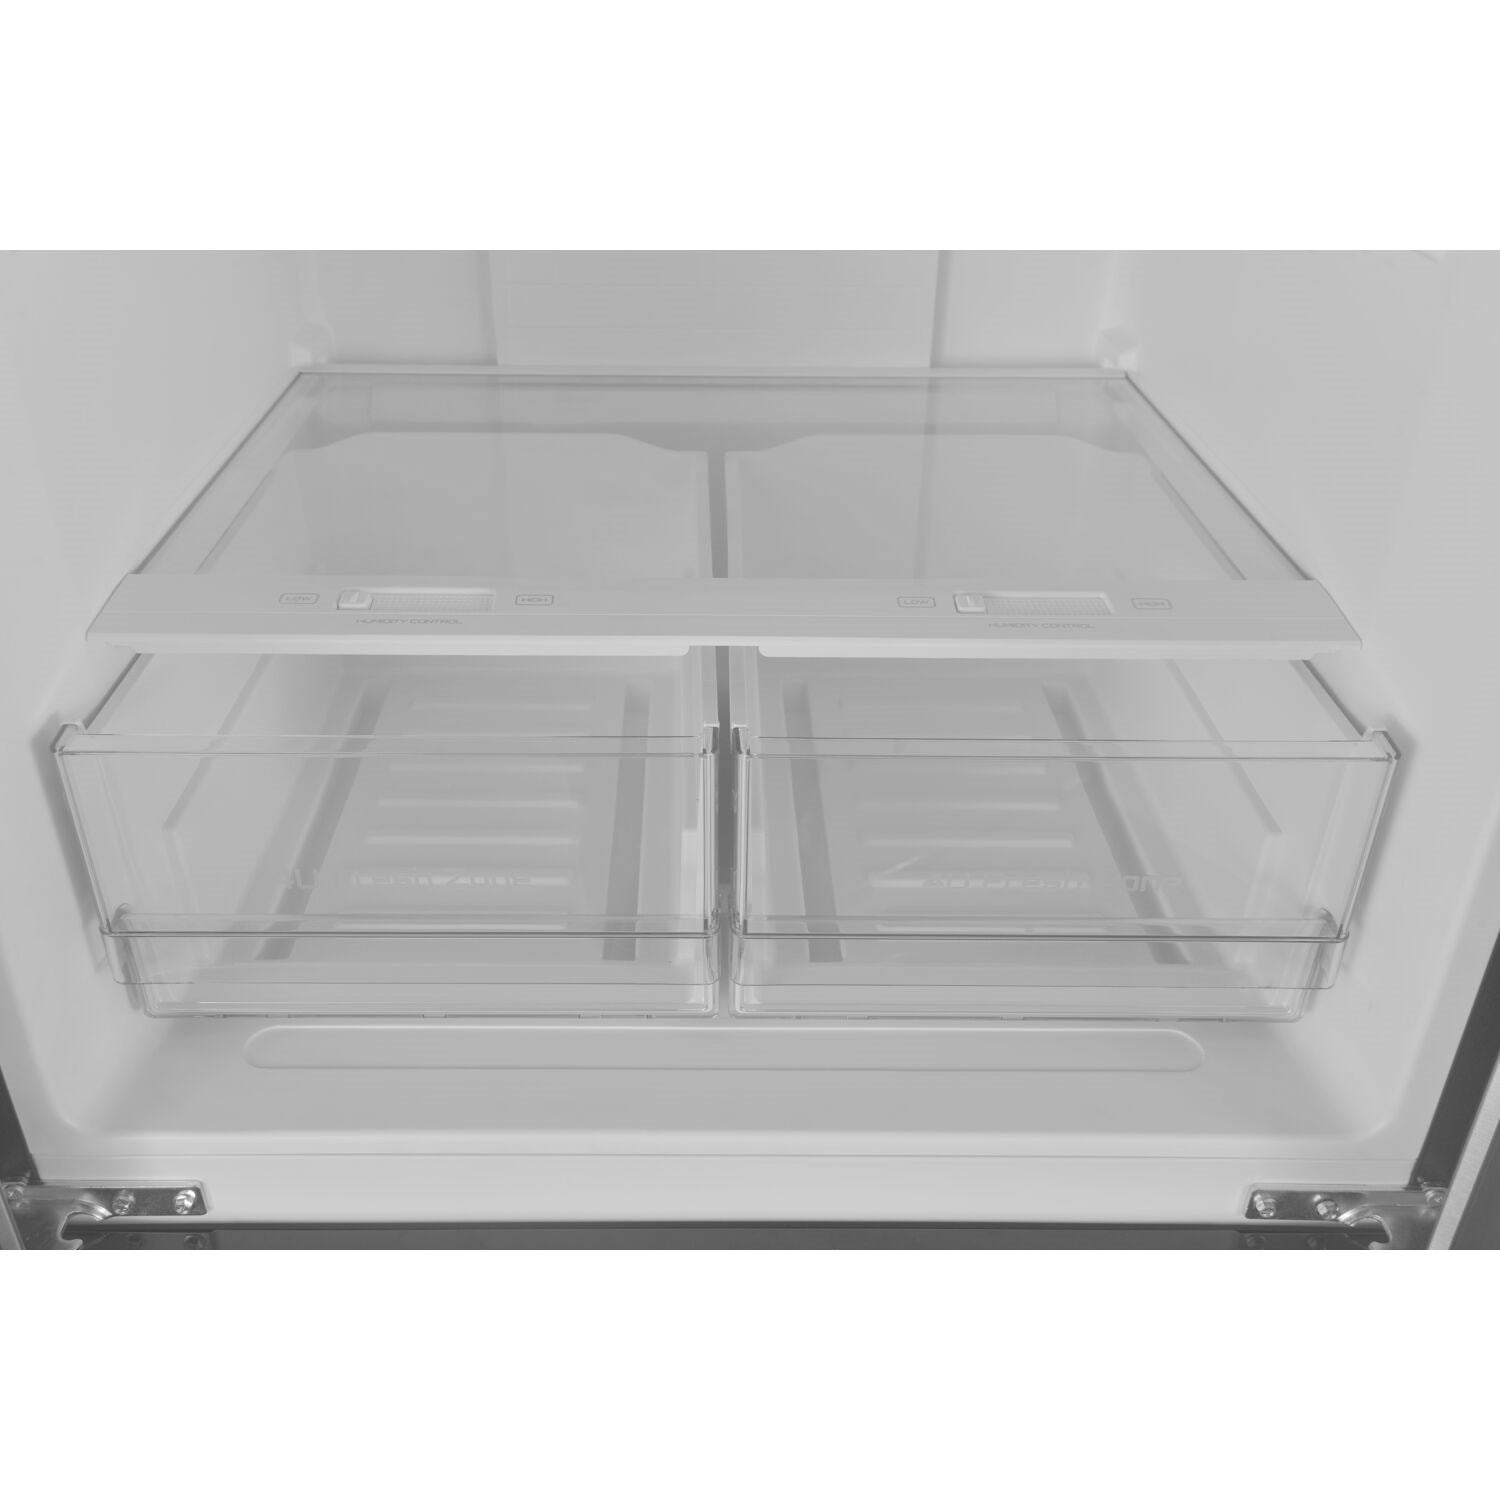 Galanz 16 Cu. Ft. White French Door Refrigerator-GLR16FWEE16